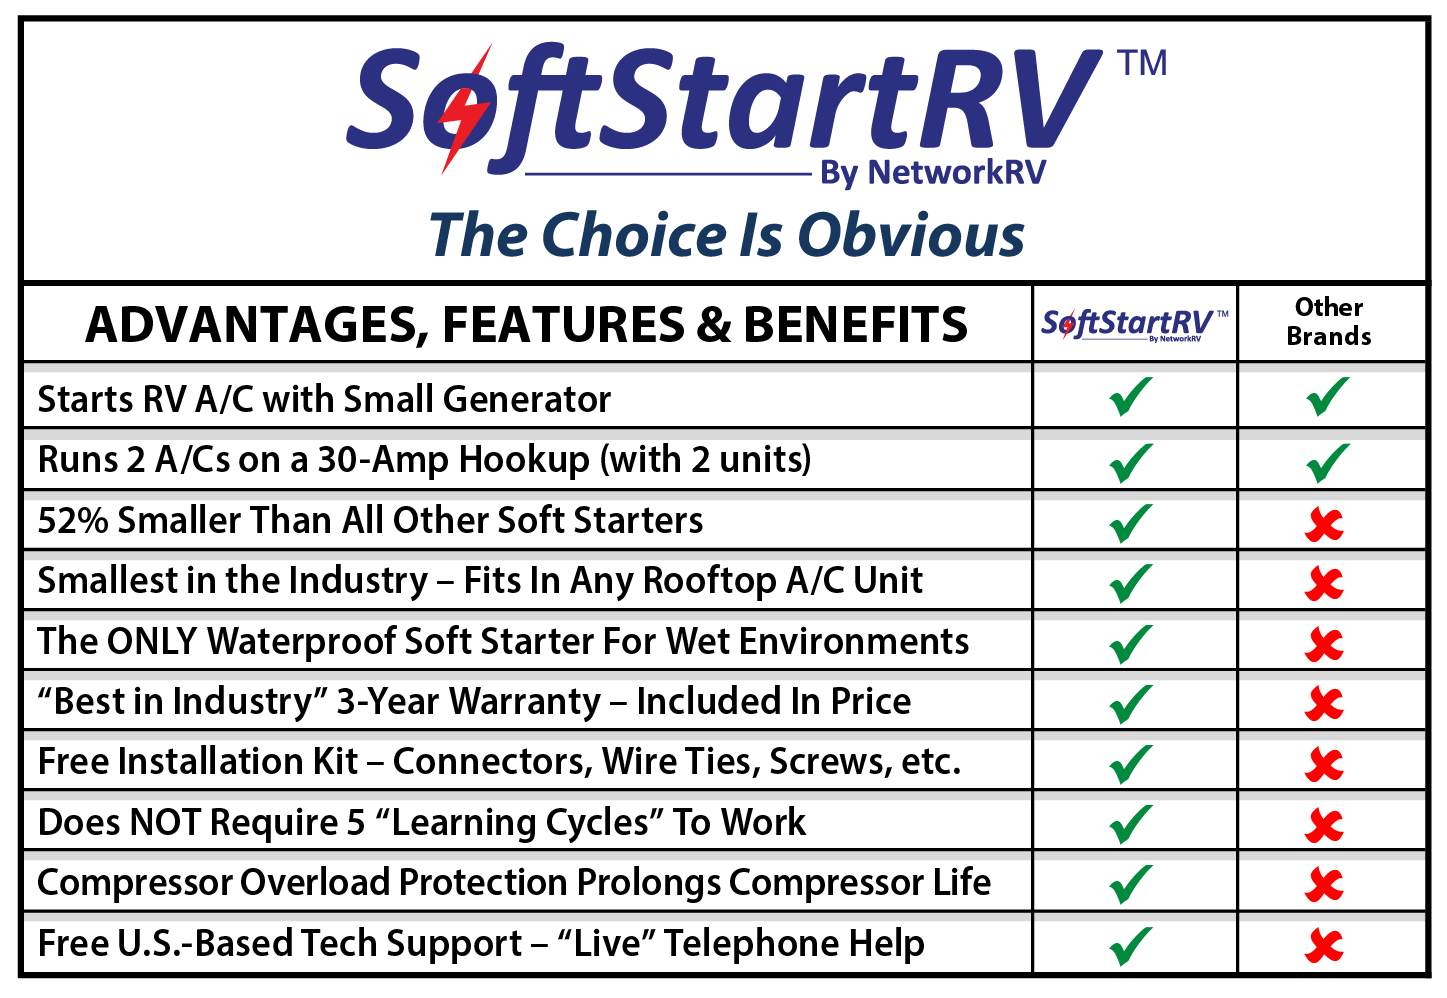 RVelectricity: New SoftStartUp is a game changer! - RV Travel